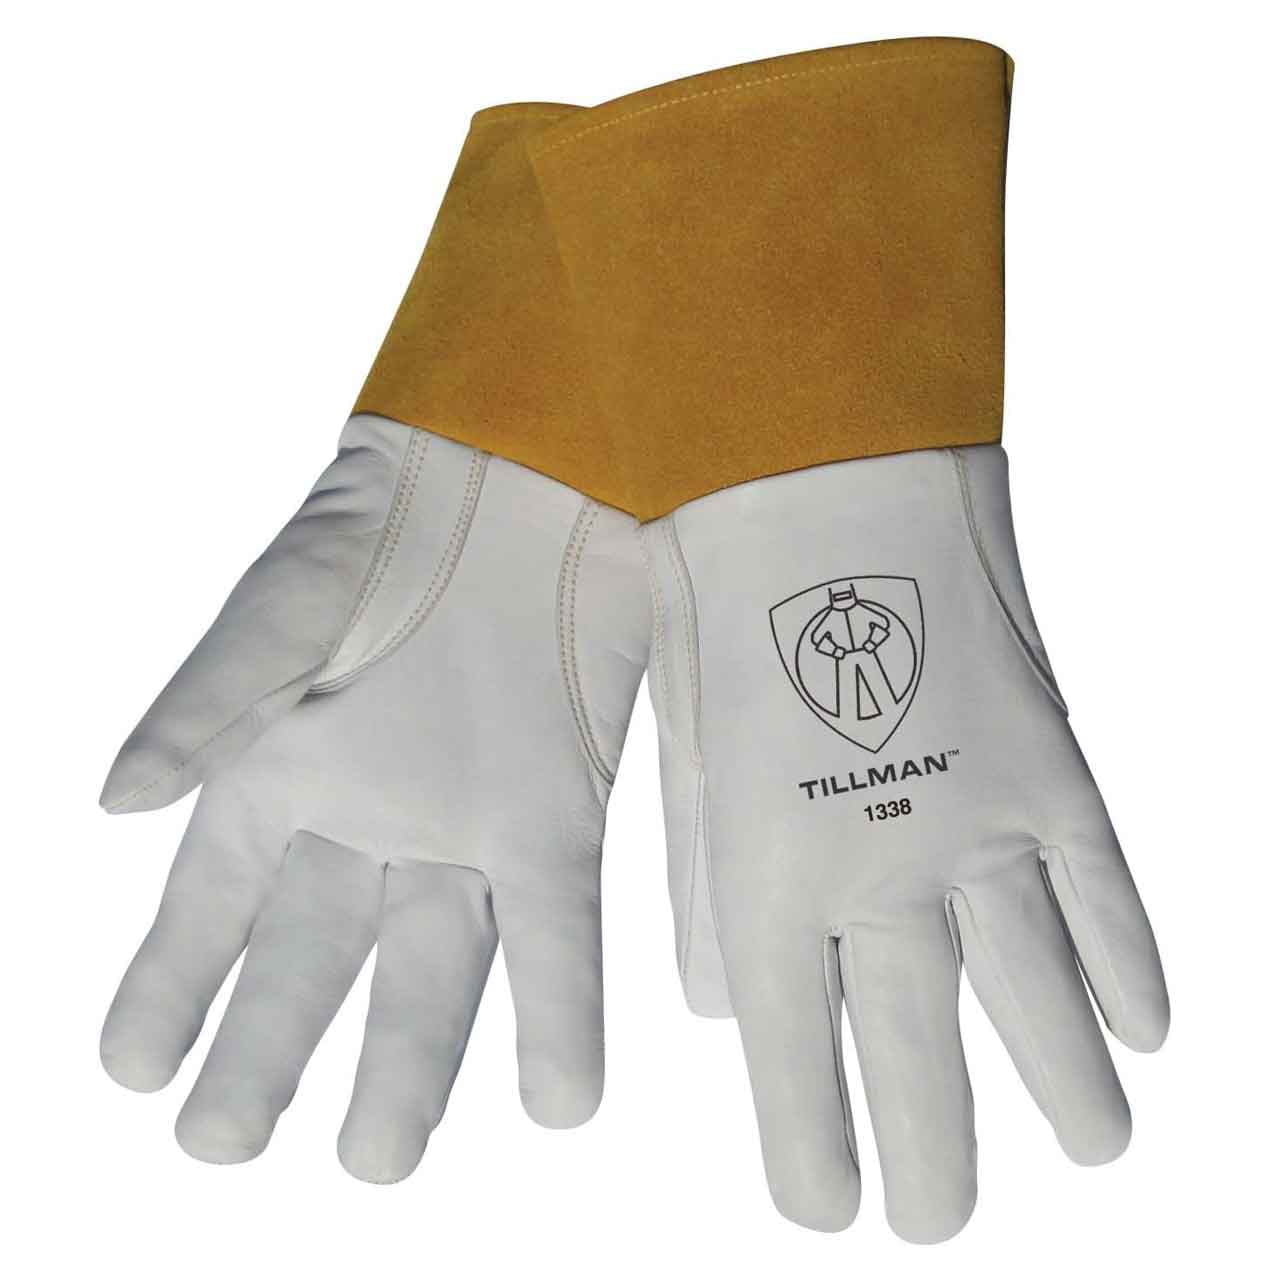 Revco T50 LG Tigster Tig Welding Gloves Large One Pair